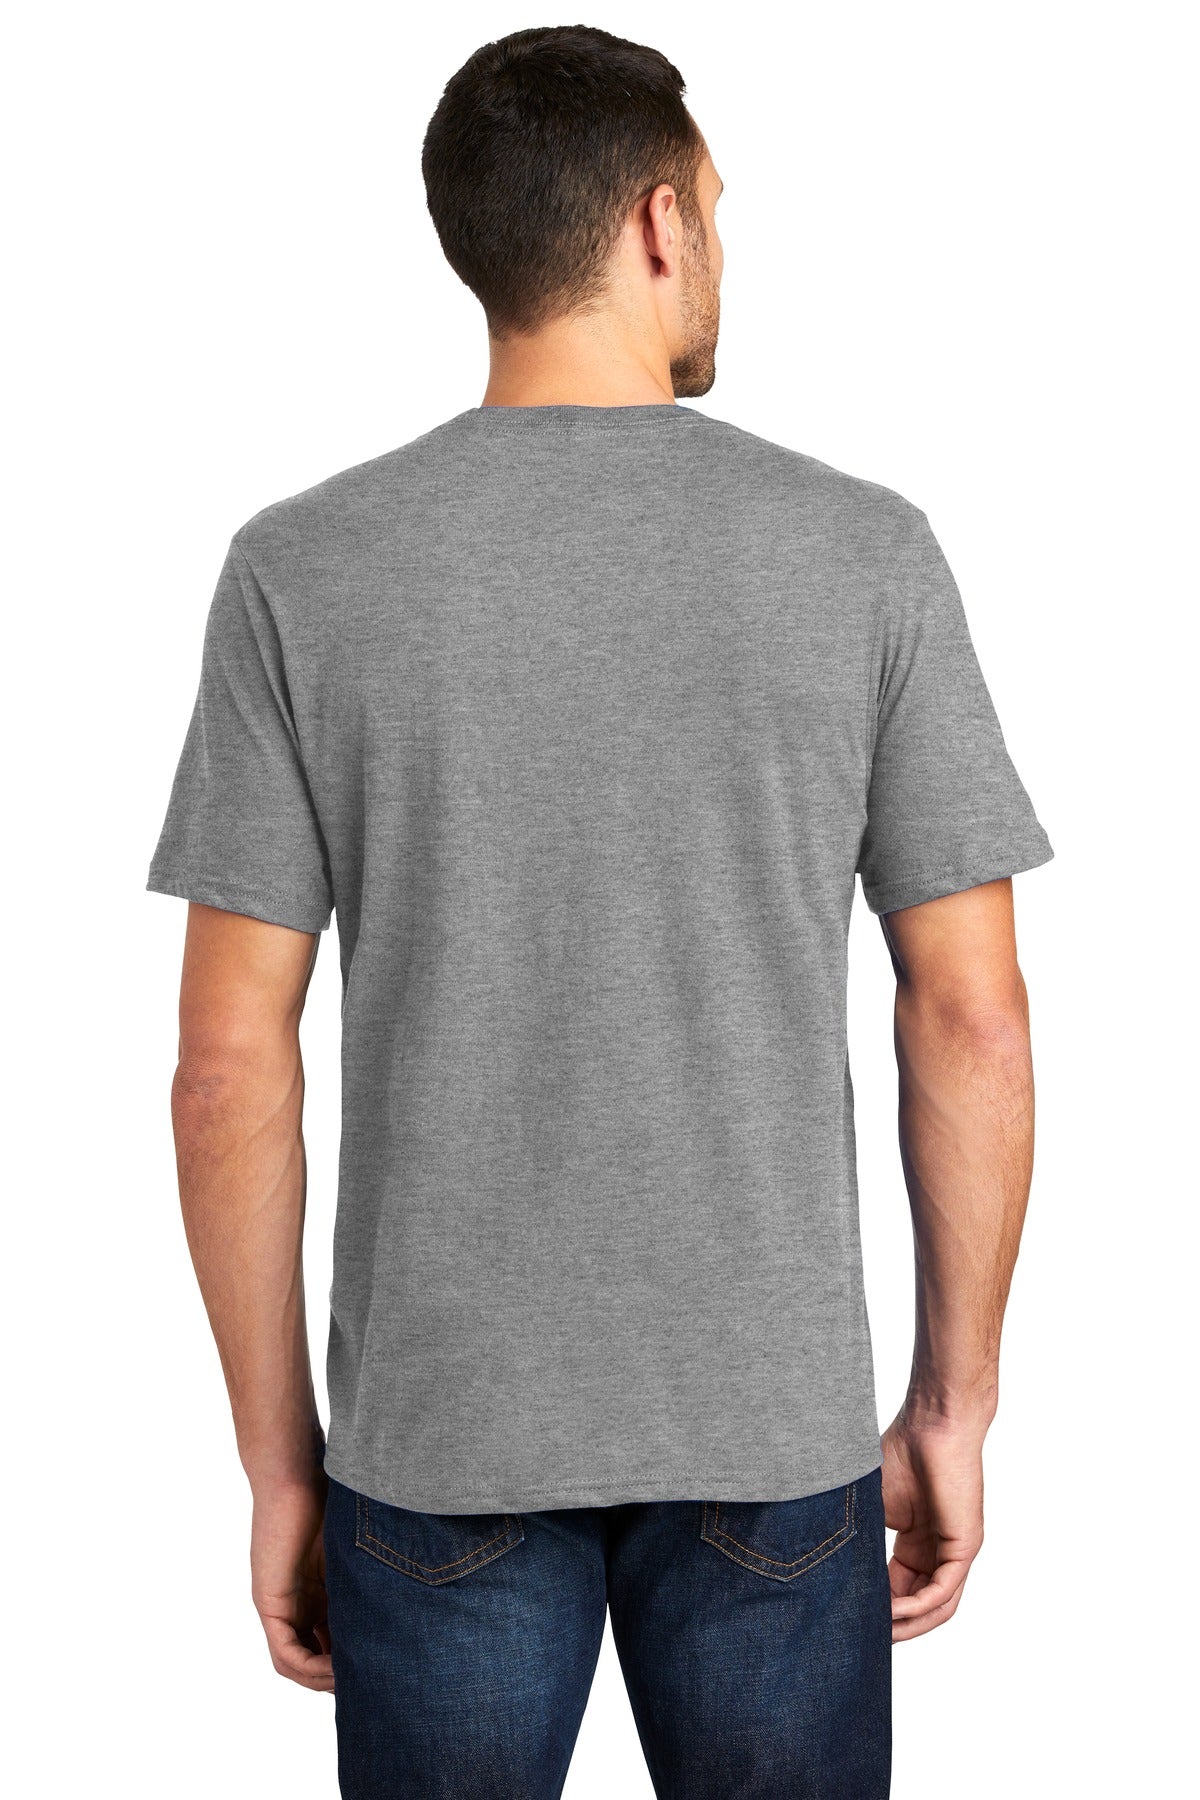 District® Very Important Tee®. DT6000 [Grey Frost] - DFW Impression